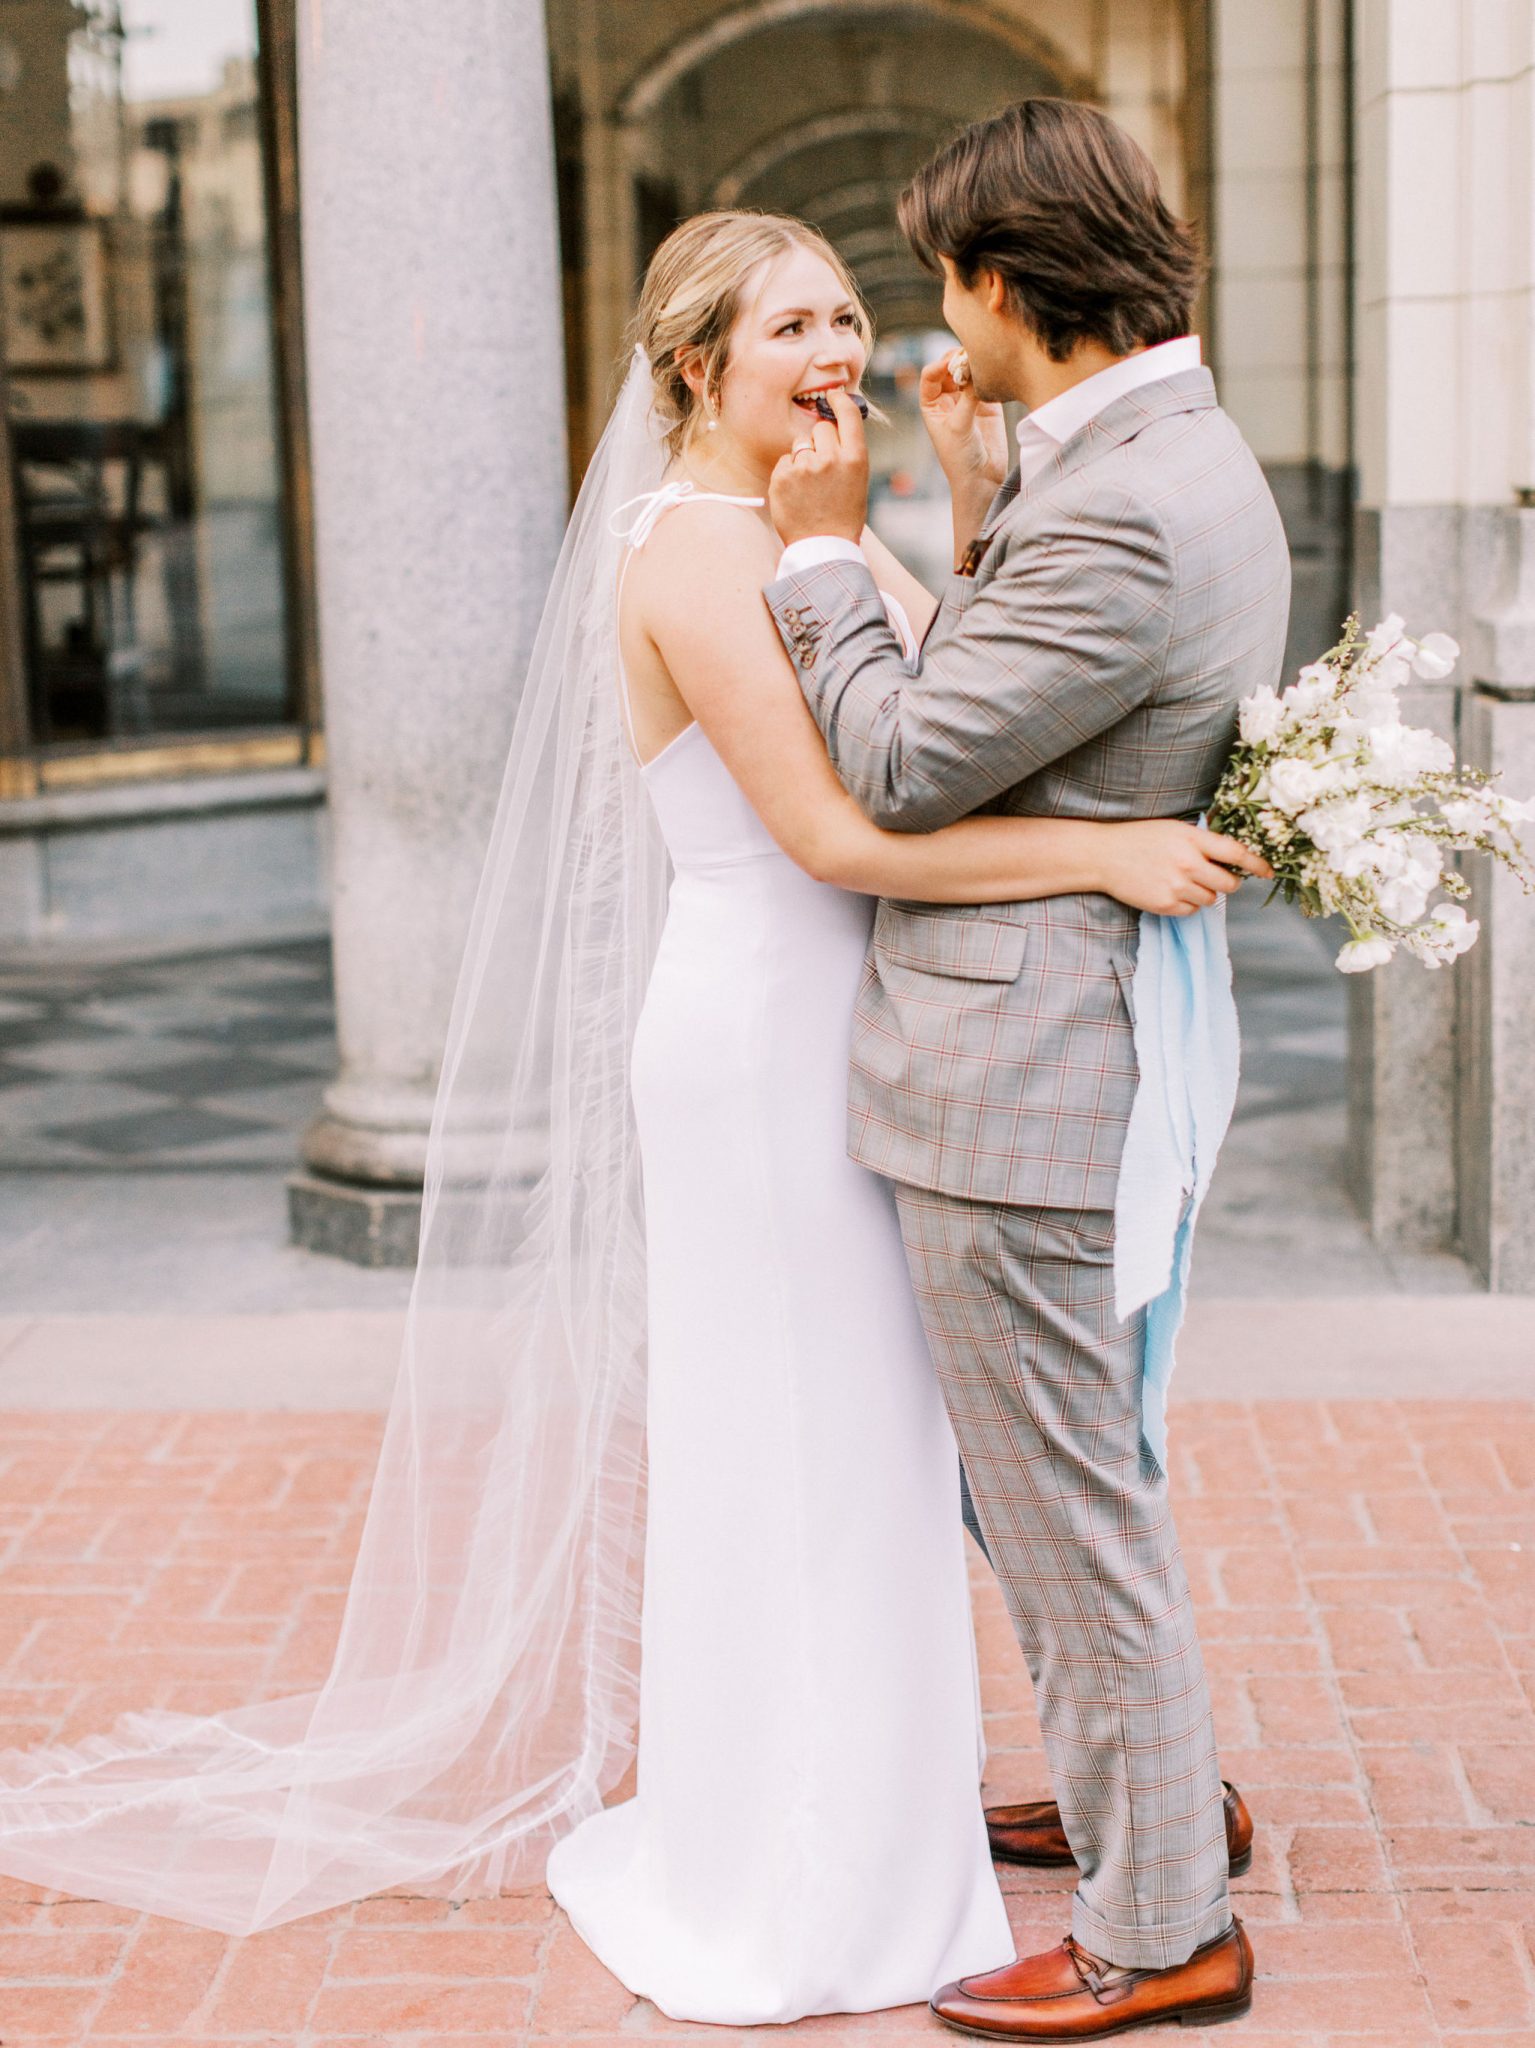 Modern groom in a grey suit enjoys macarons with a bride in a white slip dress